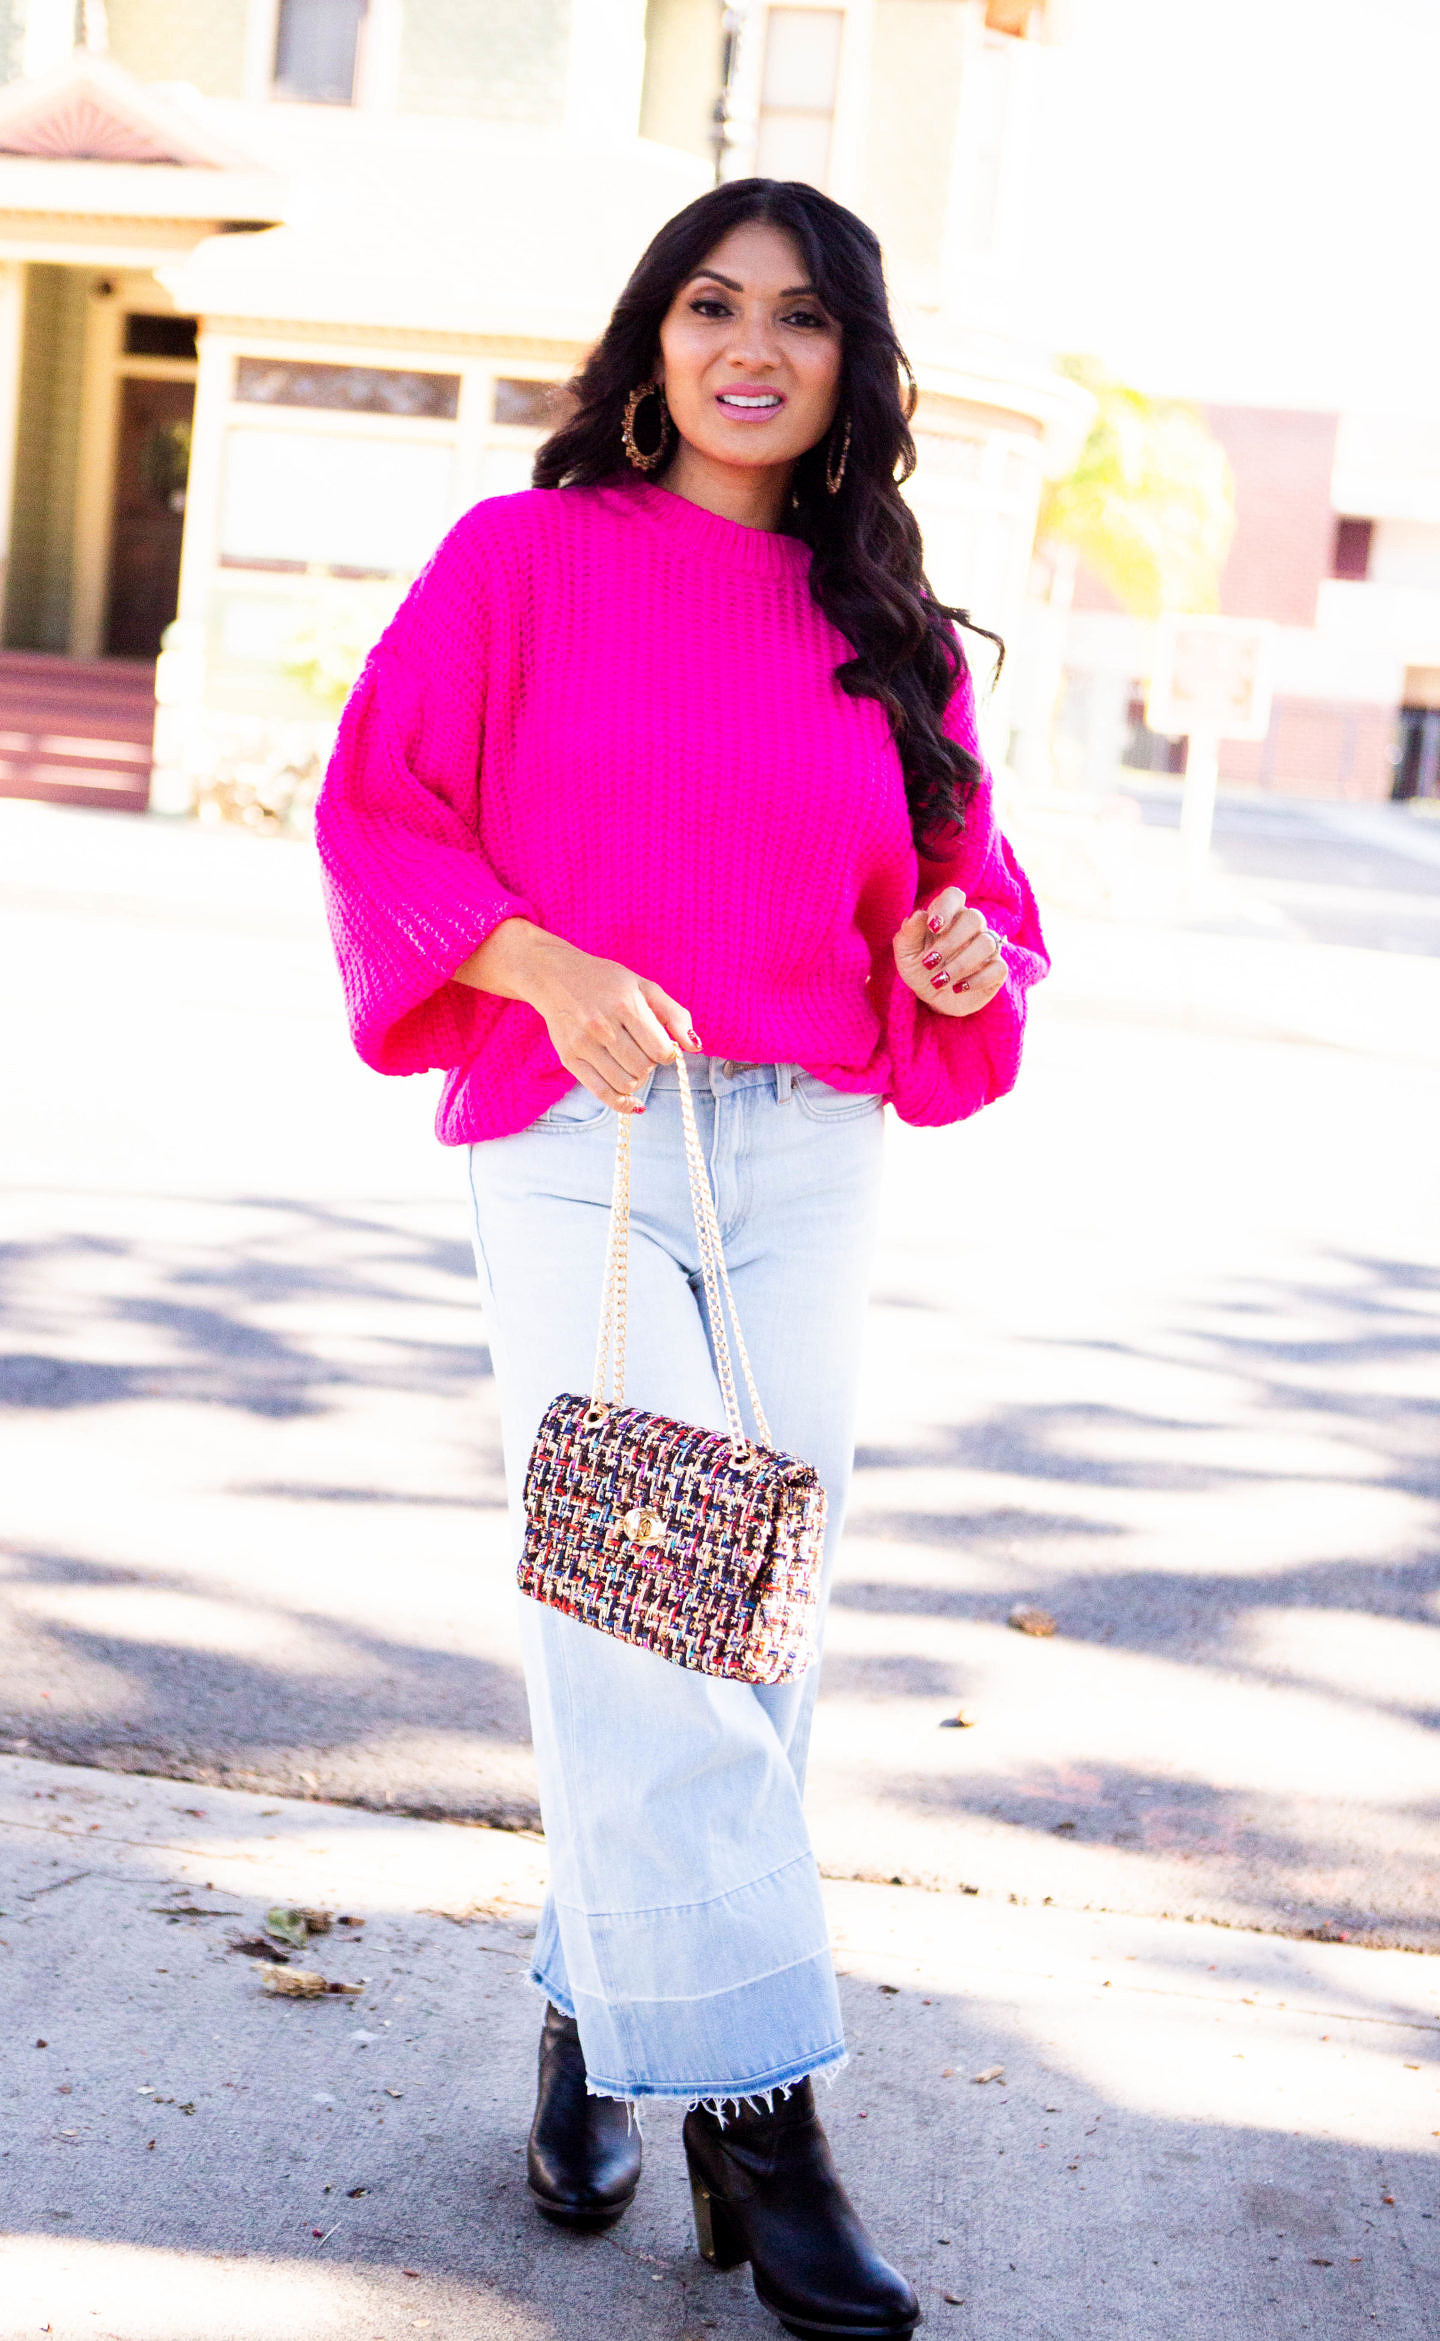 Bookmark this post ASAP if you have been looking to add a pop of color to your fall/winter wardrobe? Orange County Blogger Debbie Savage is sharing why you need to add a hot pink sweater to your wardrobe ASAP! See why here!